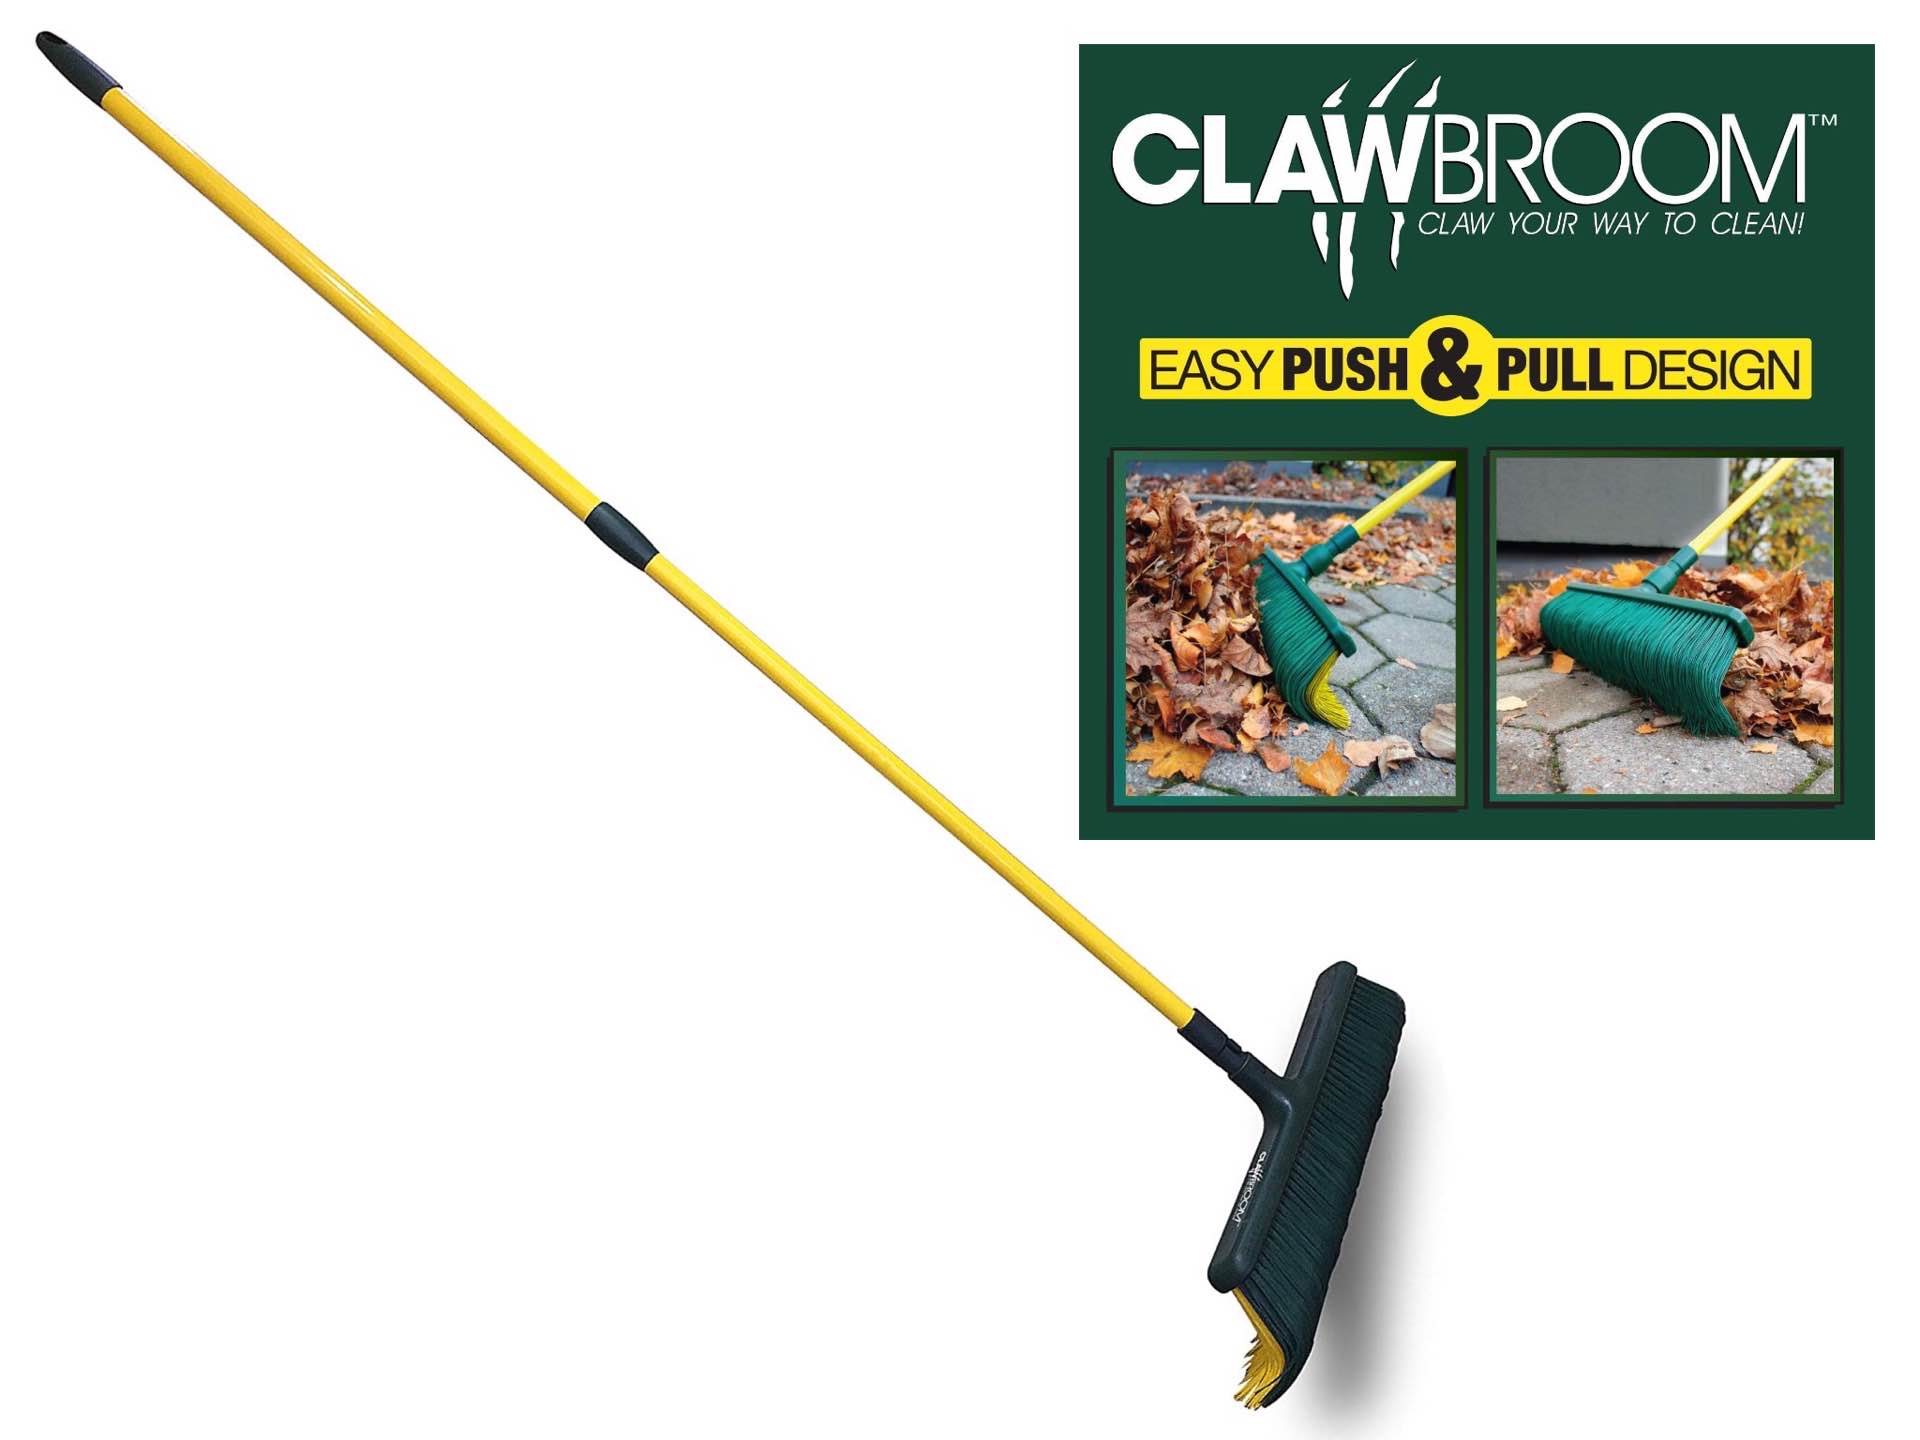 the-claw-broom